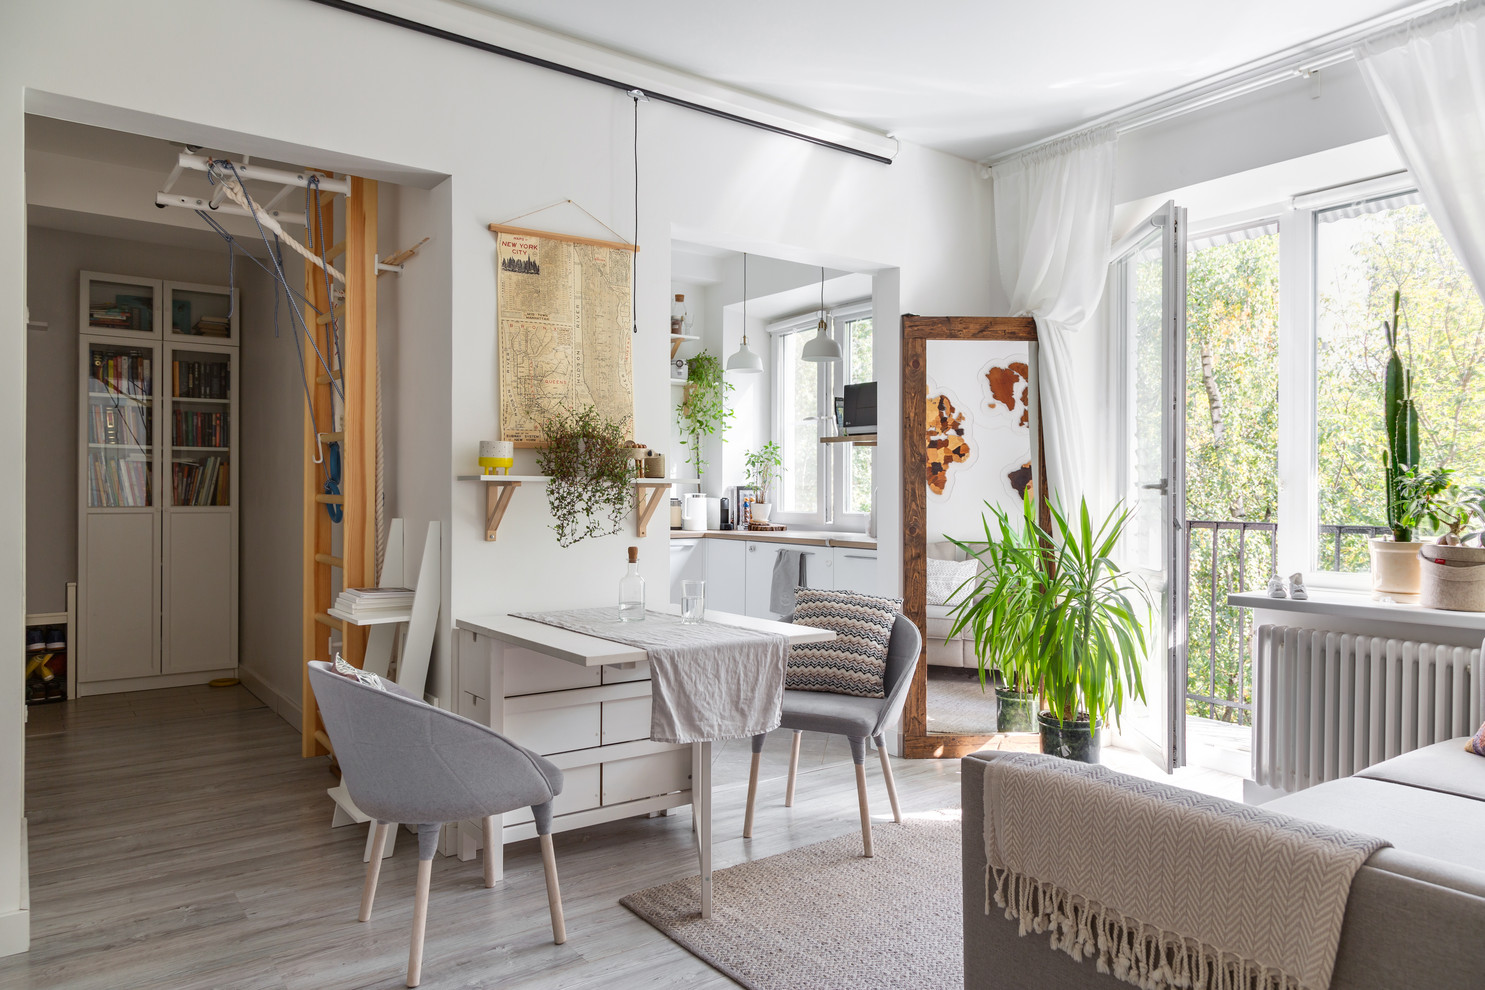 15 Heavenly Scandinavian Dining Room Designs Any Home Can Make Use Of